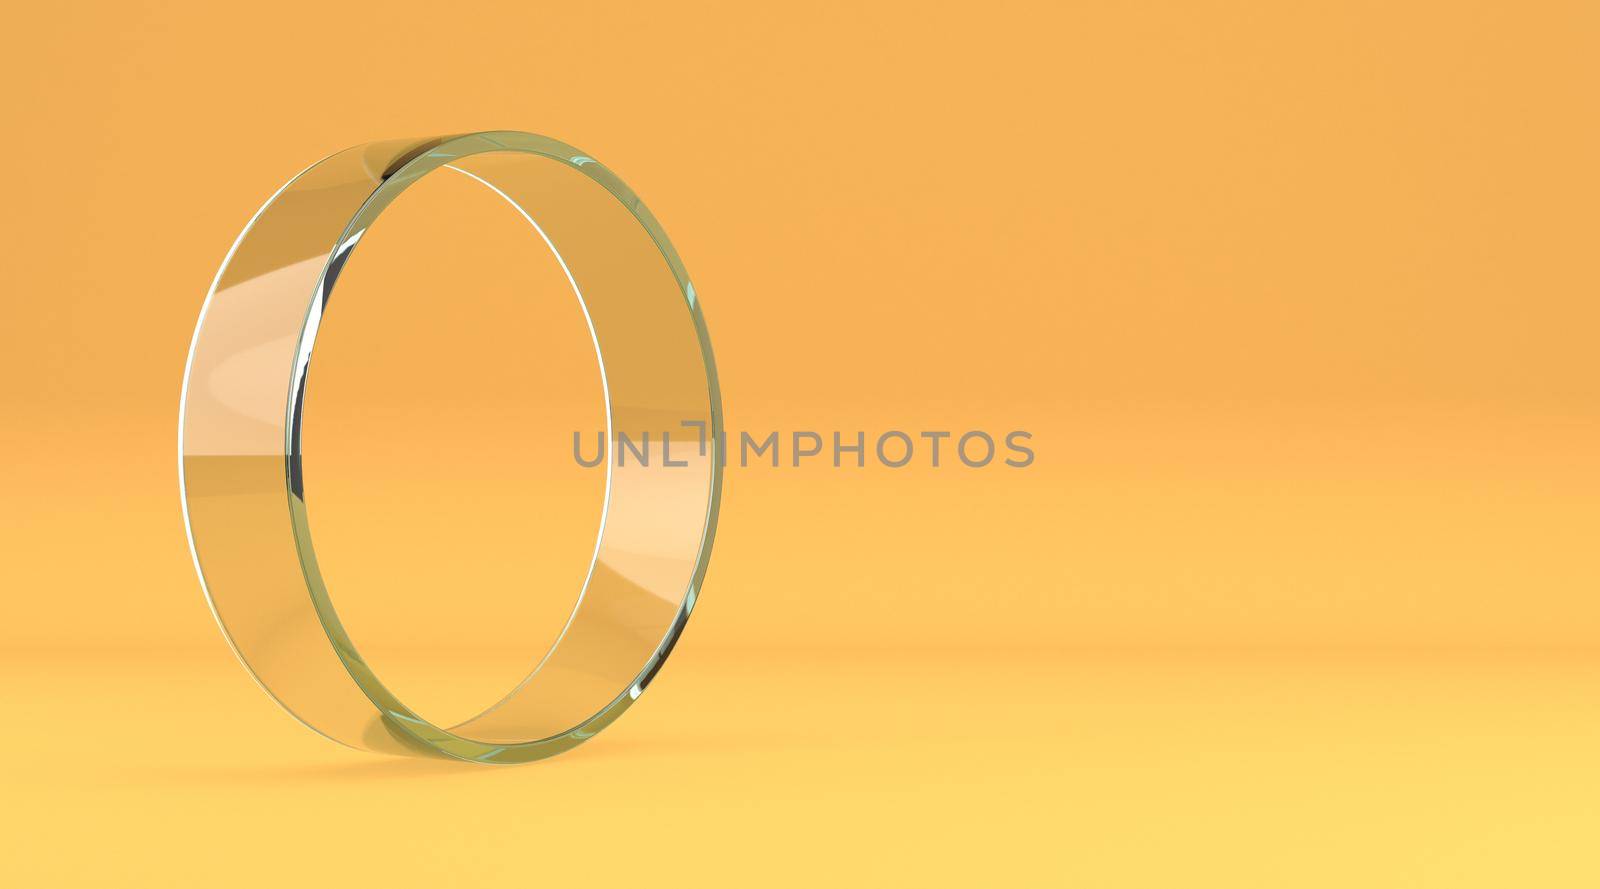 Glass circle frame 3D rendering illustration isolated on yellow background